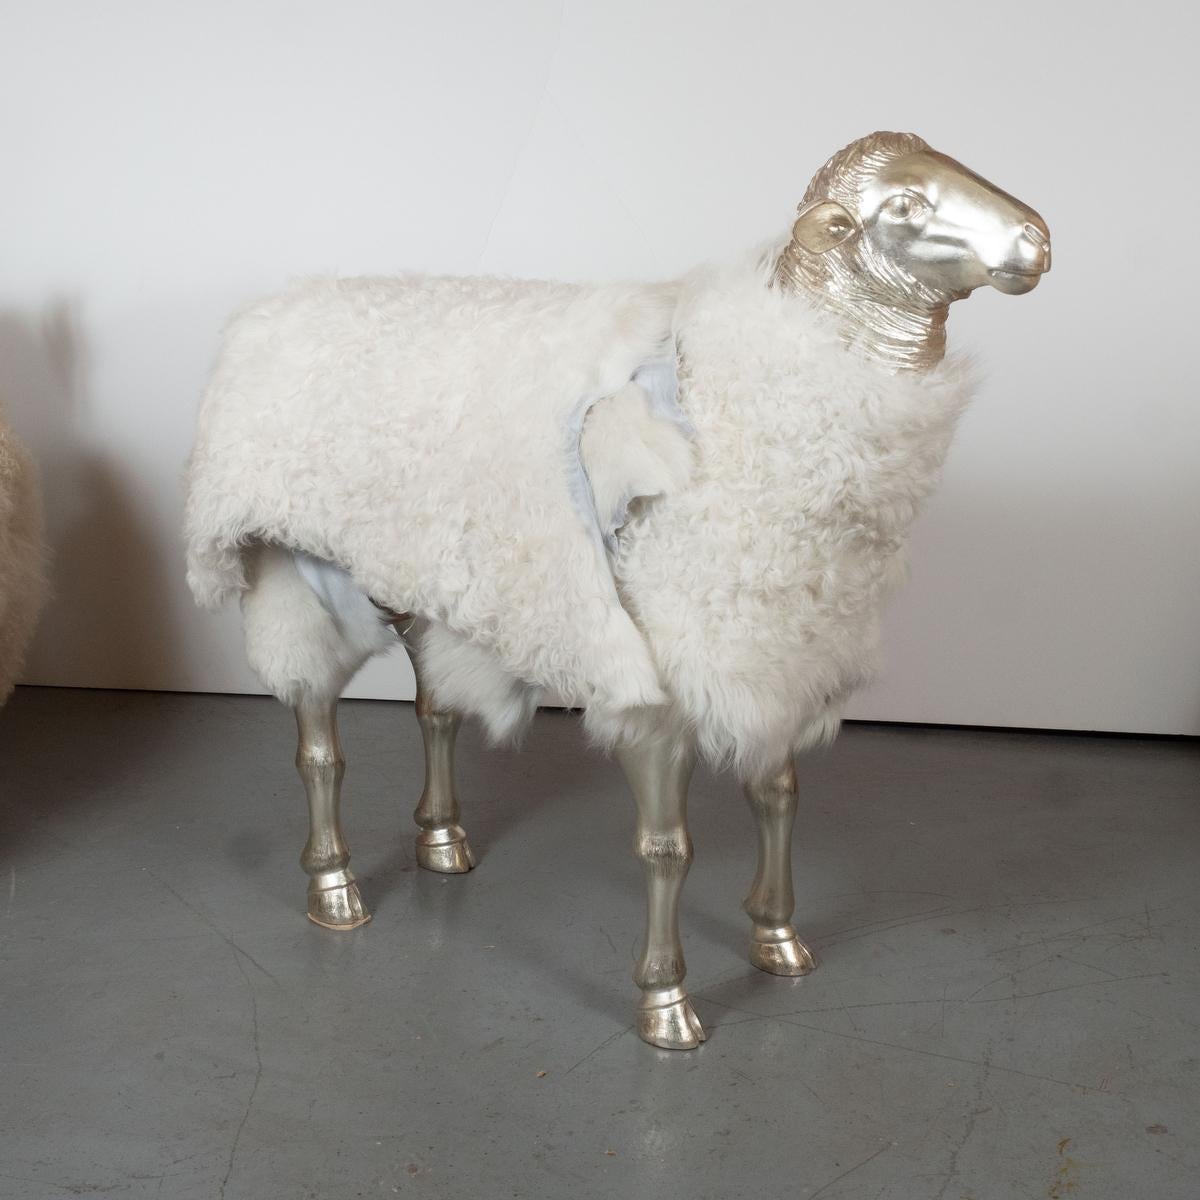 White gold finish woodcarving sculpture depicting a sheep by master woodworker Carlos Villegas